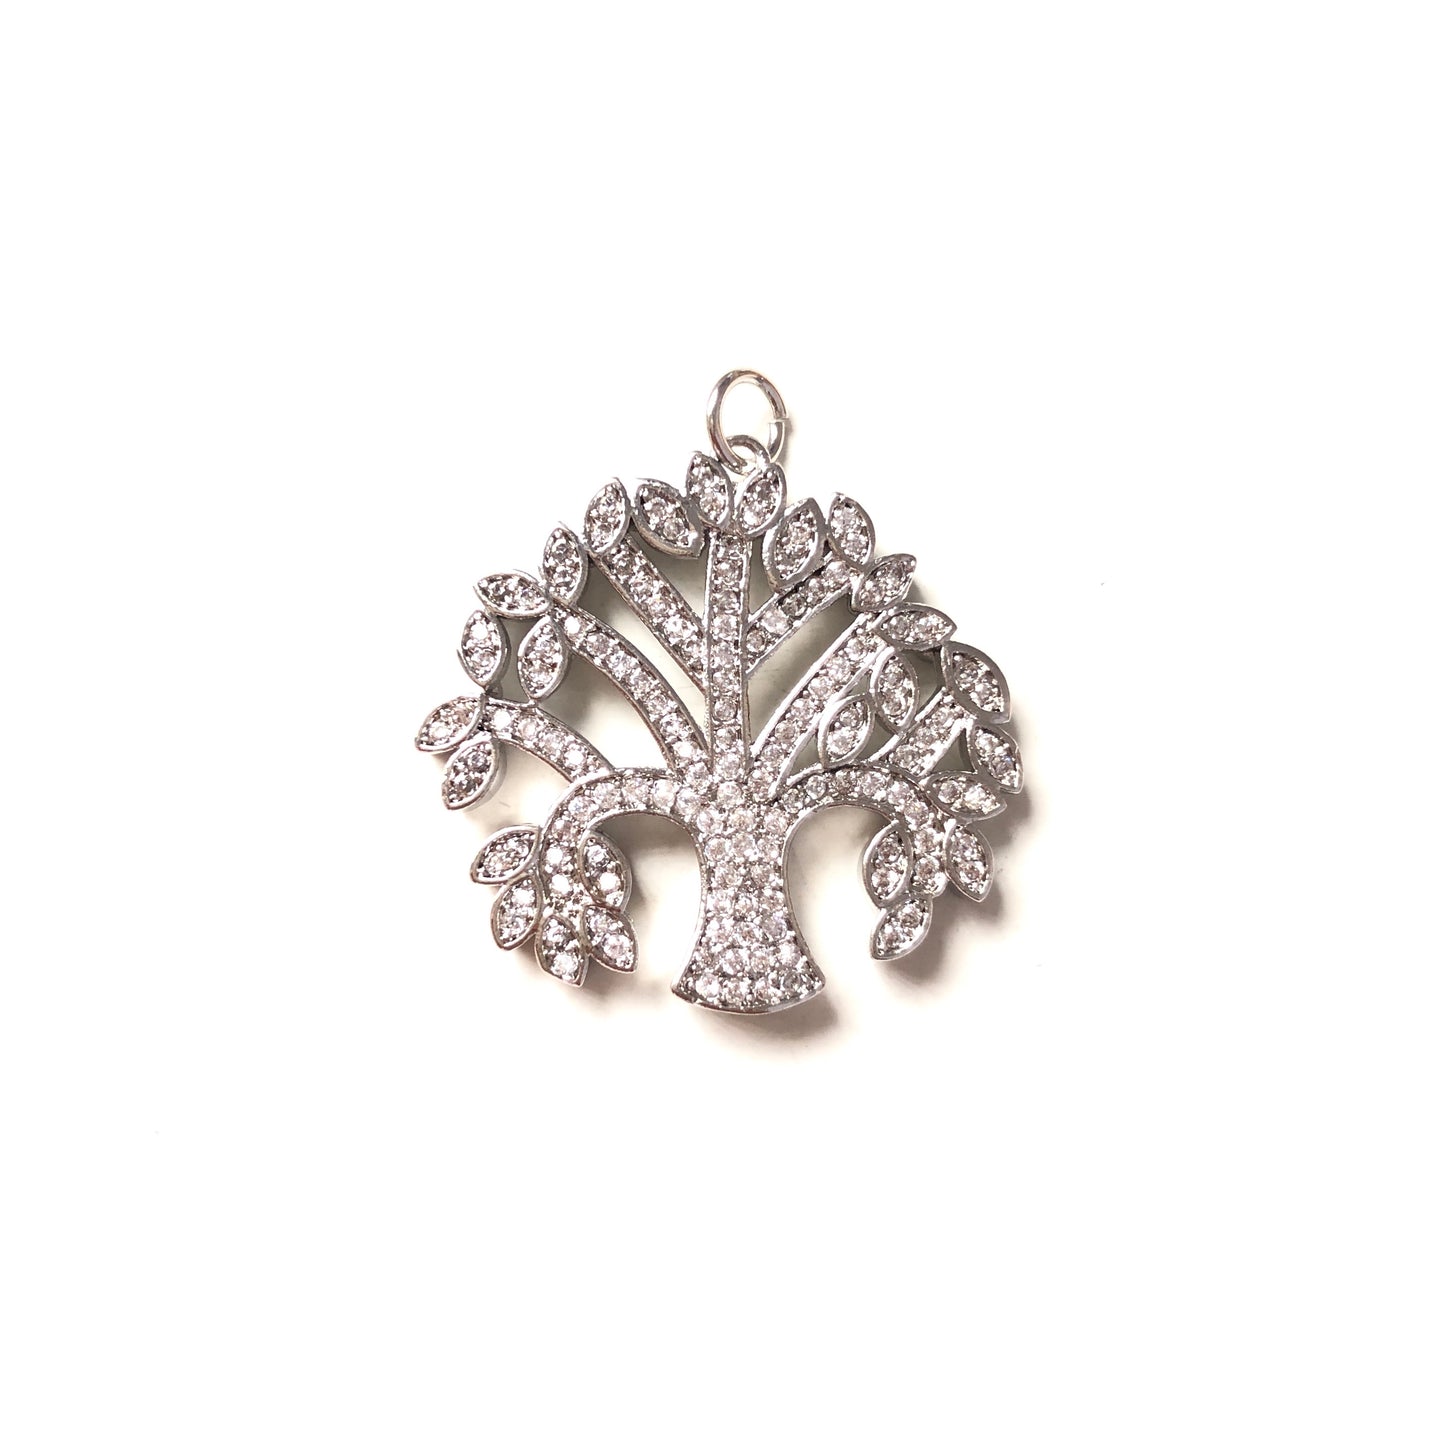 10pcs/lot 23*23mm CZ Paved Tree of Life Charms Silver CZ Paved Charms Charms Beads Beyond